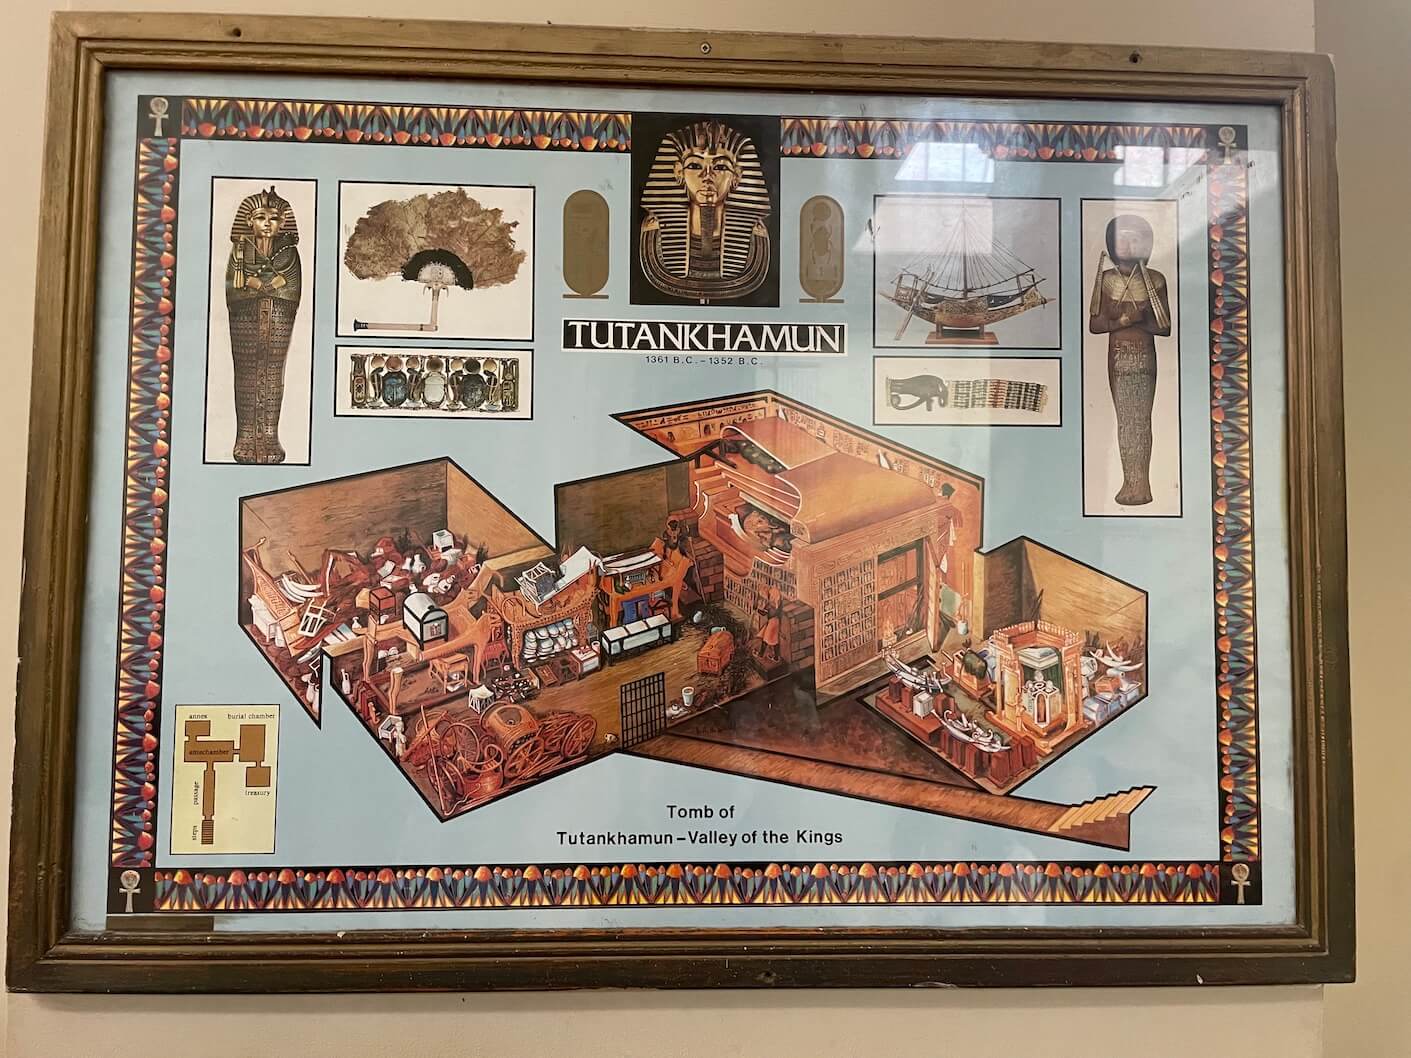 A poster showing the layout of Tutankhamun's tomb 